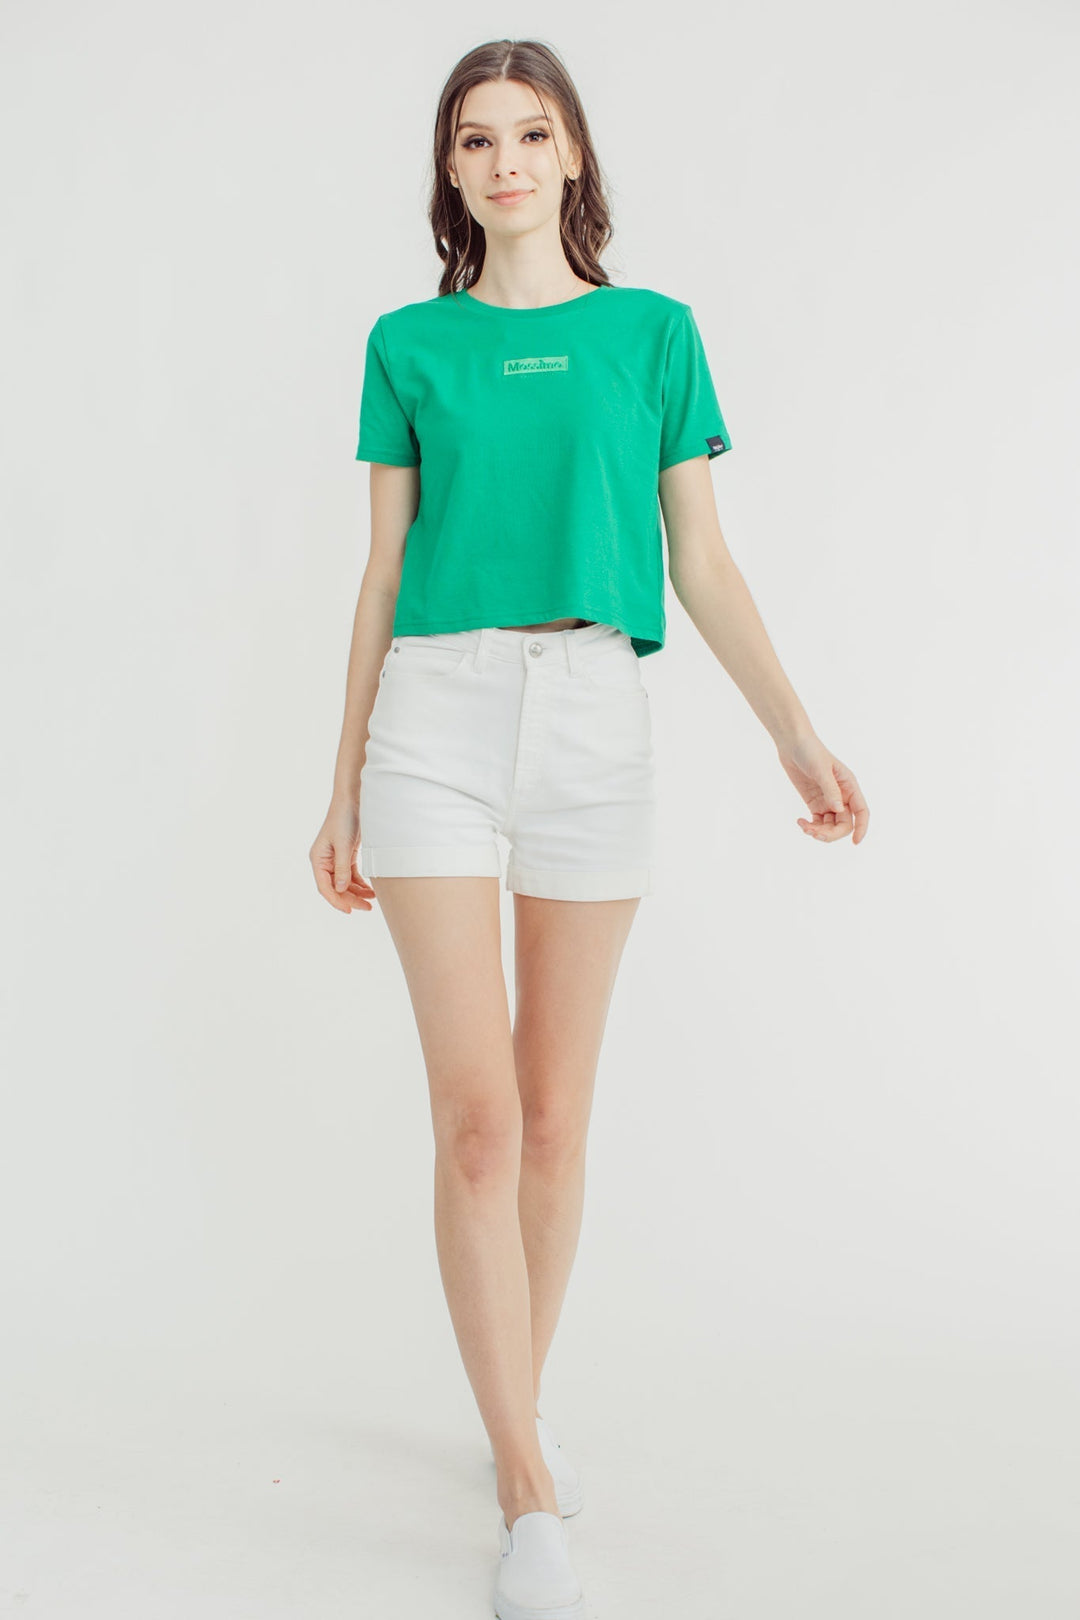 Mossimo Jellybean with Small Branding Embroidery Classic Cropped Tee - Mossimo PH